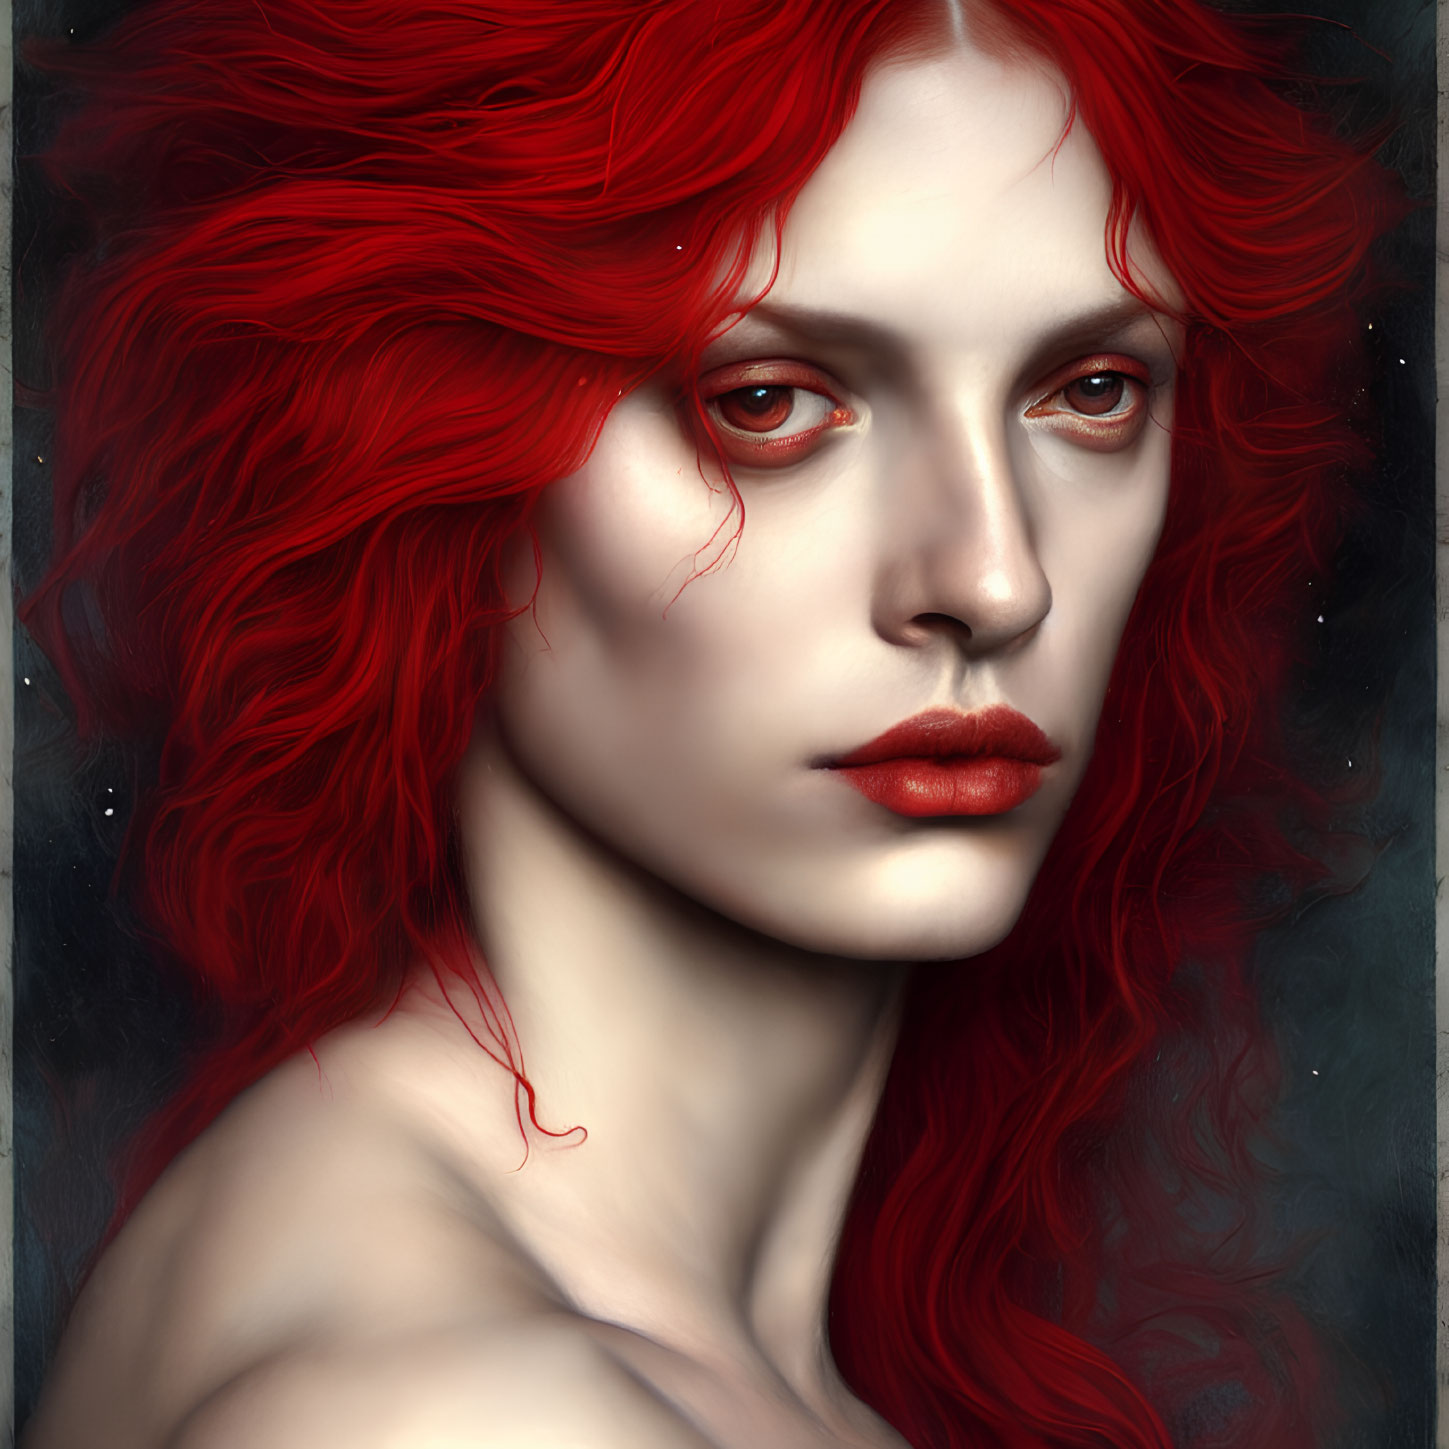 Portrait of a person with vibrant red hair, red eyes, and pale skin